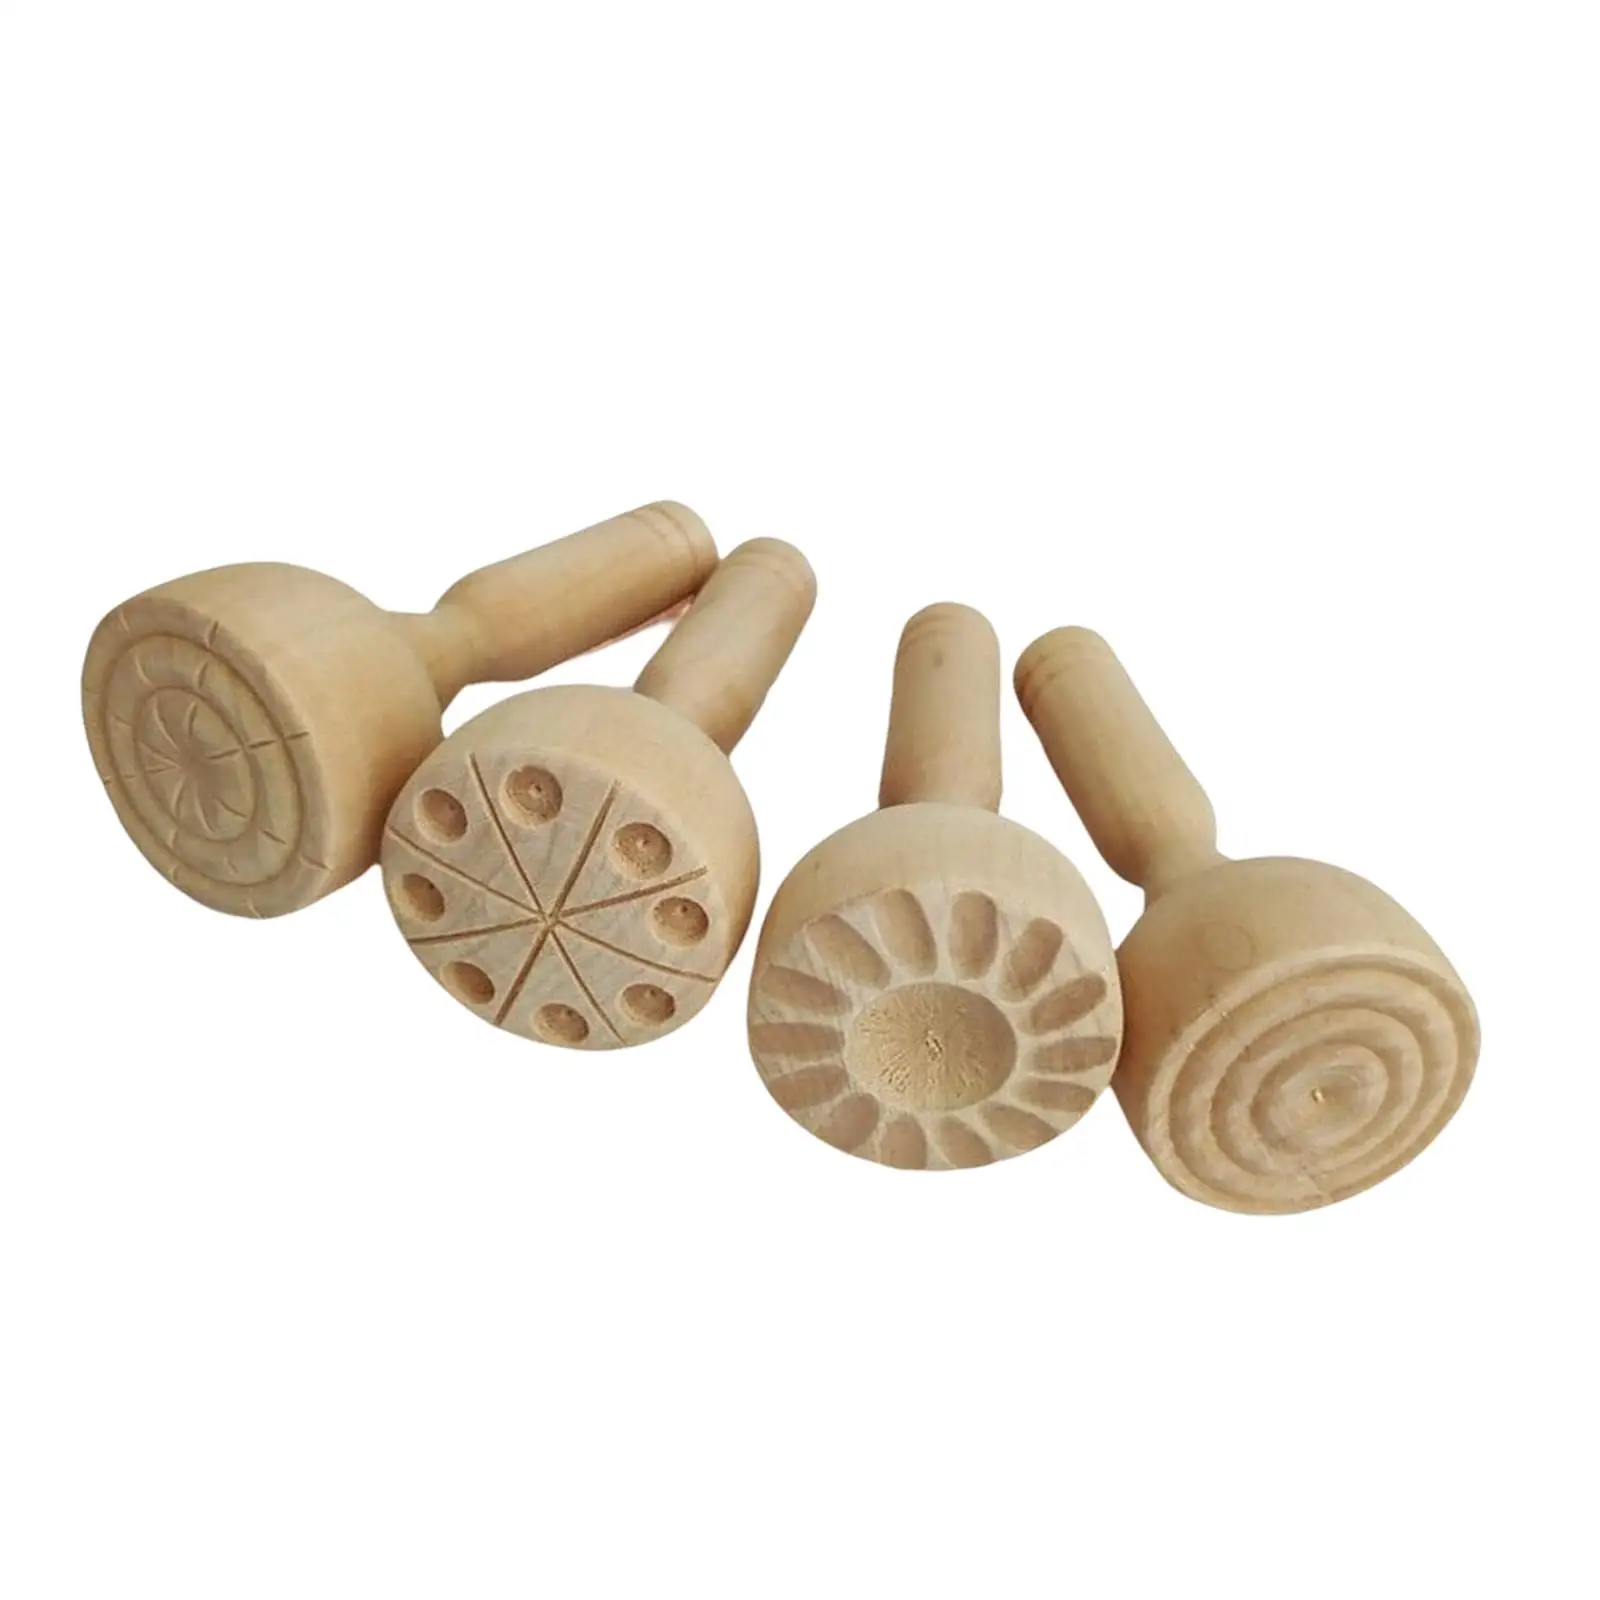 4 Pieces Wooden seal Moulds Press Molds Tools Making Molds DIY Decoration for Toddler Activity Supplies Child Art Craft